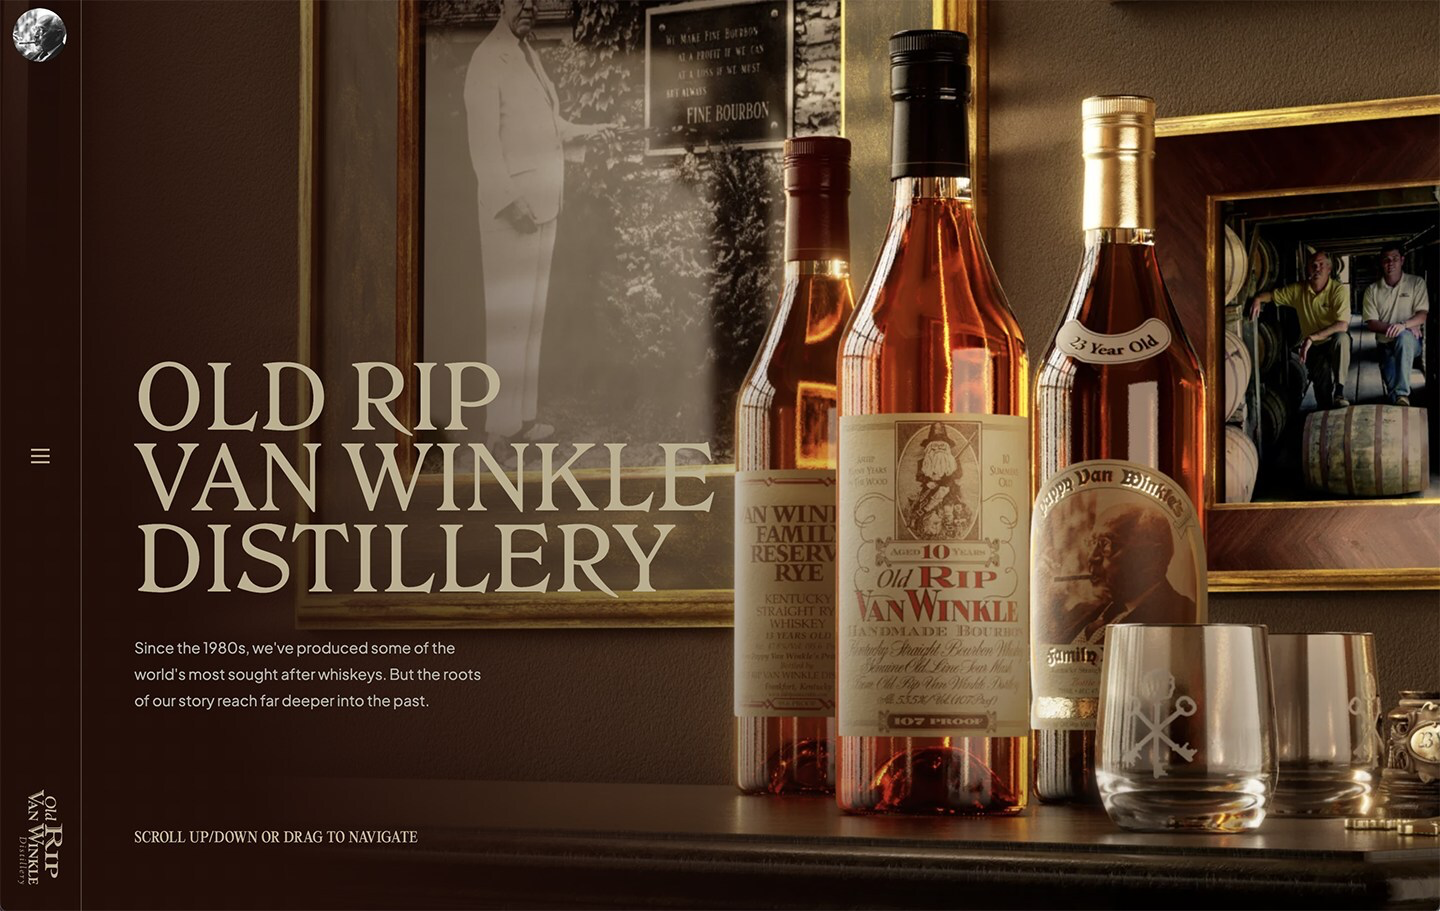 Pappy Van Winkle’s Legacy and Bourbon Honored Through New Website